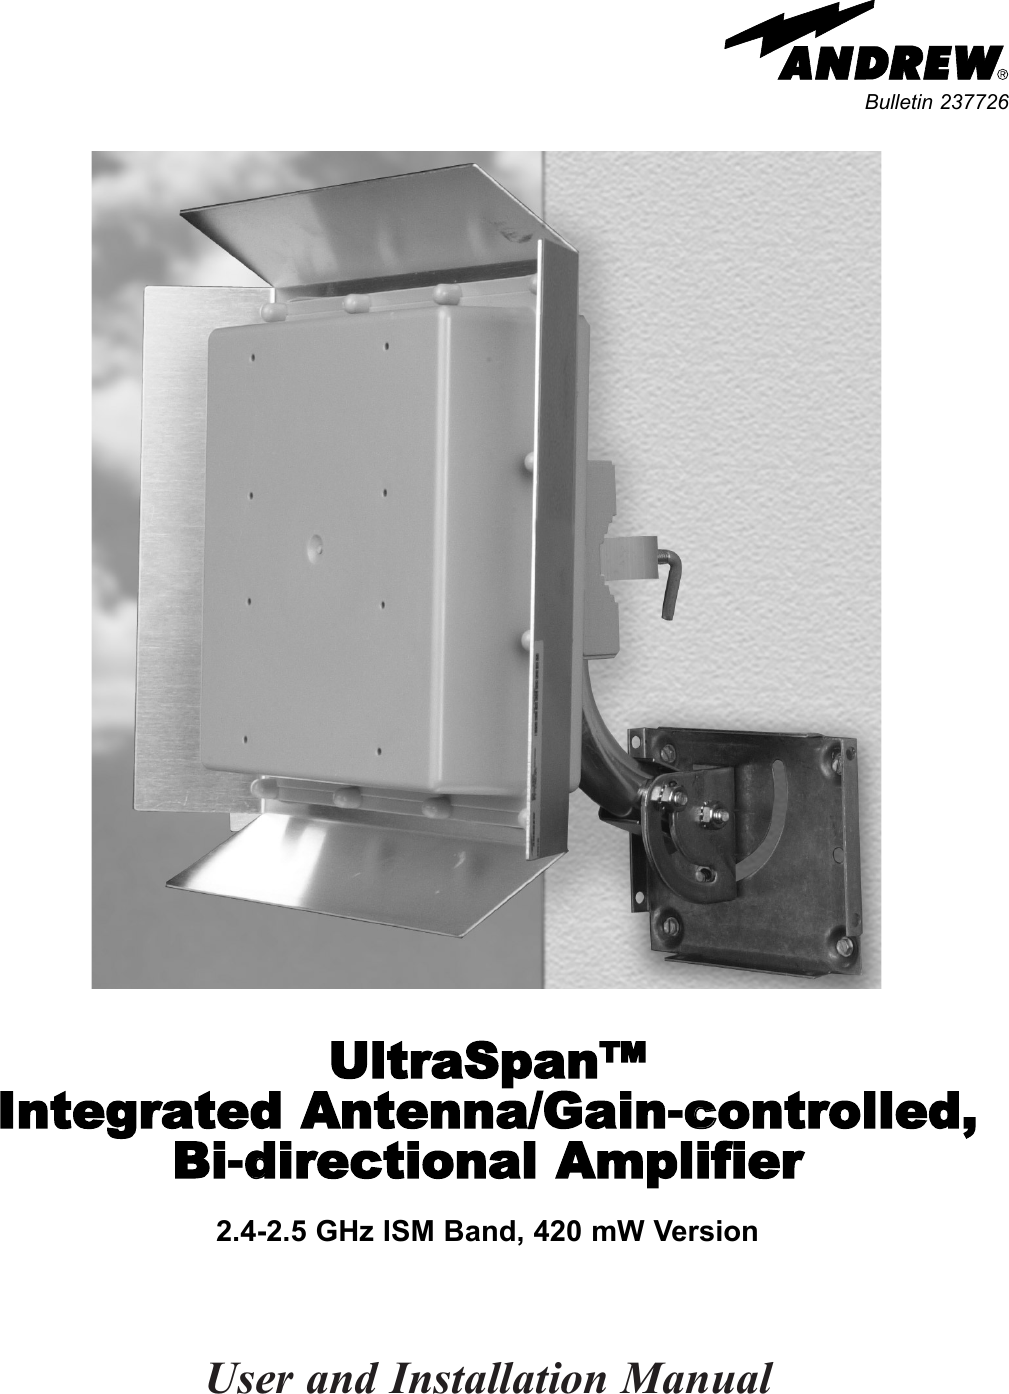 User and Installation ManualUltraSpan™ Integrated AAntenna/Gain-ccontrolled, Bi-ddirectional AAmplifier2.4-2.5 GHz ISM Band, 420 mW VersionBulletin 237726